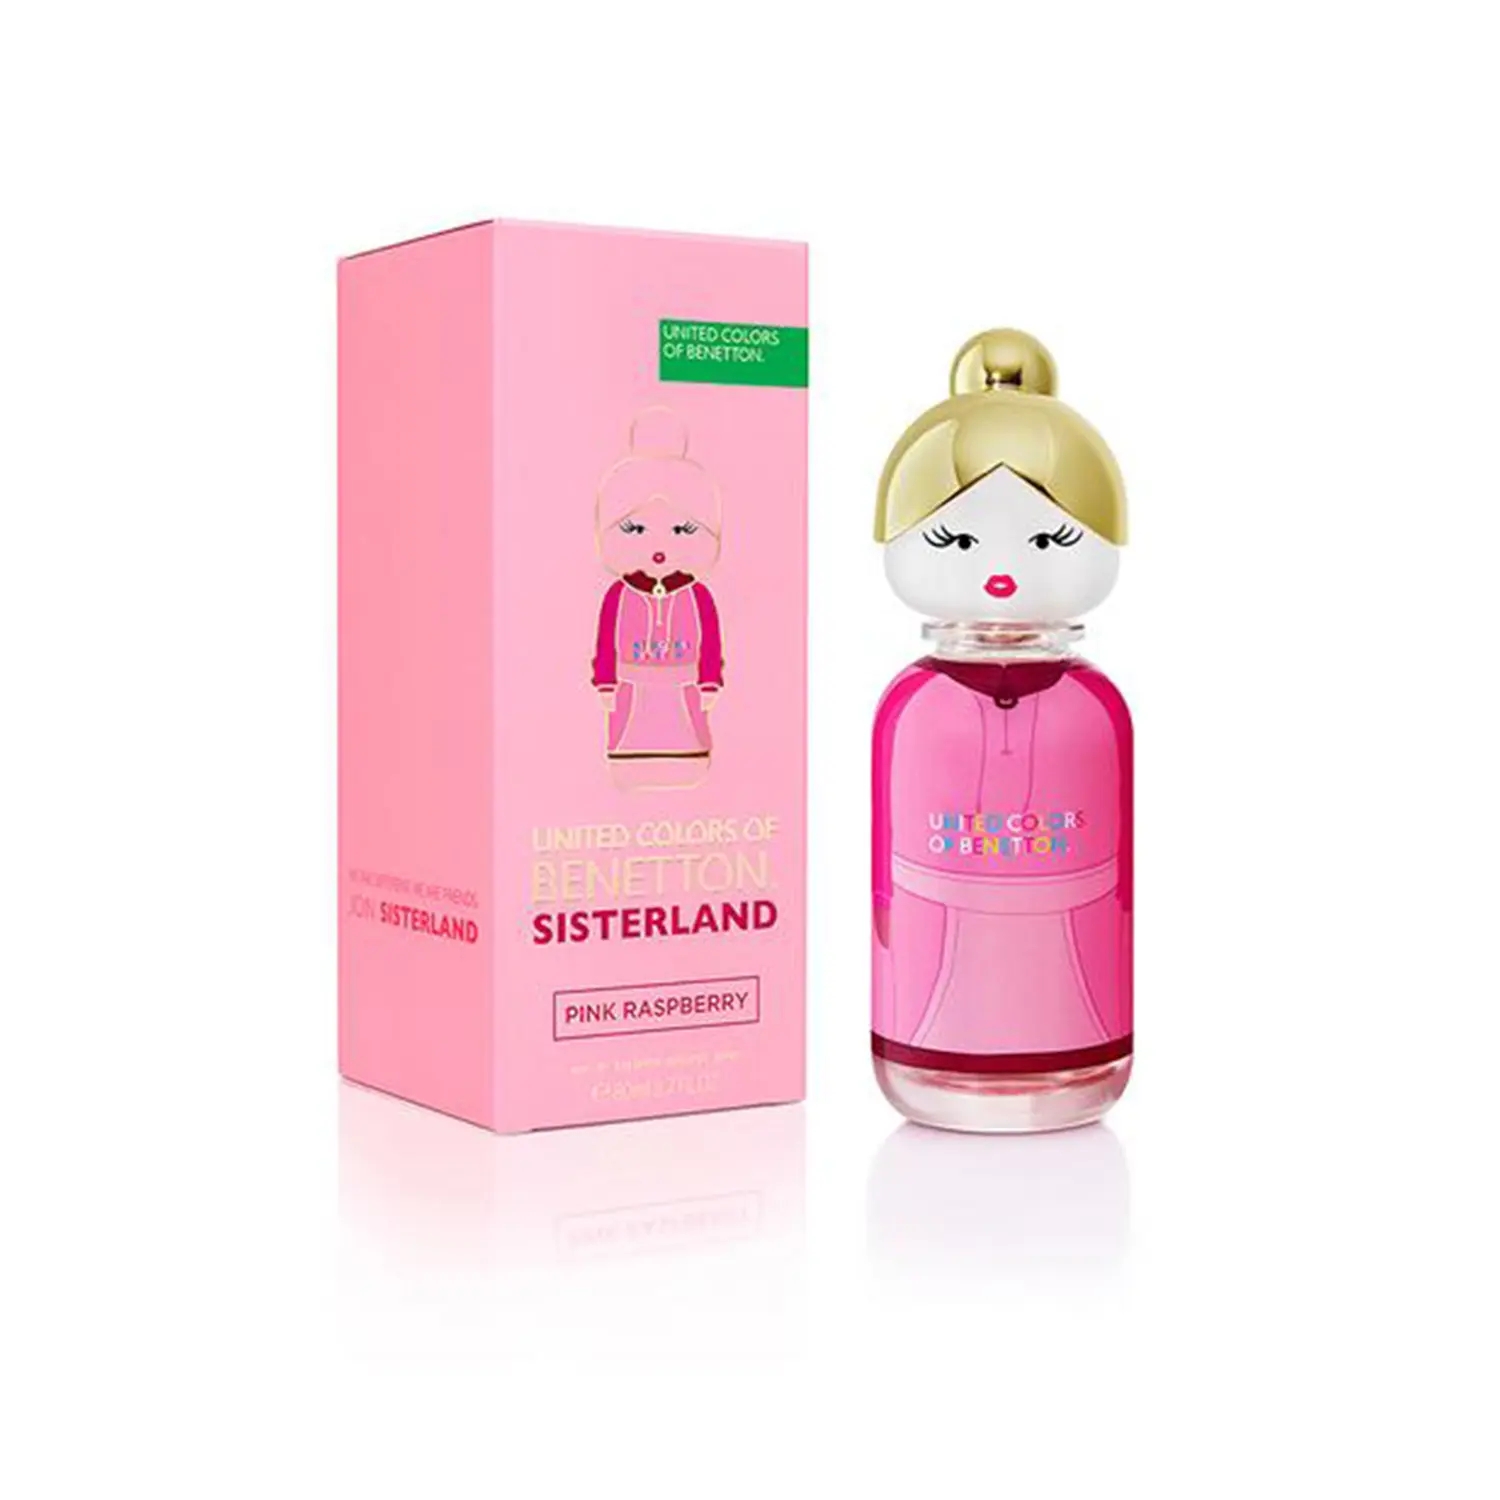 United Colors Of Benetton | United Colors Of Benetton Sisterland Pink Raspberry For Her Eau De Toilette (80ml)